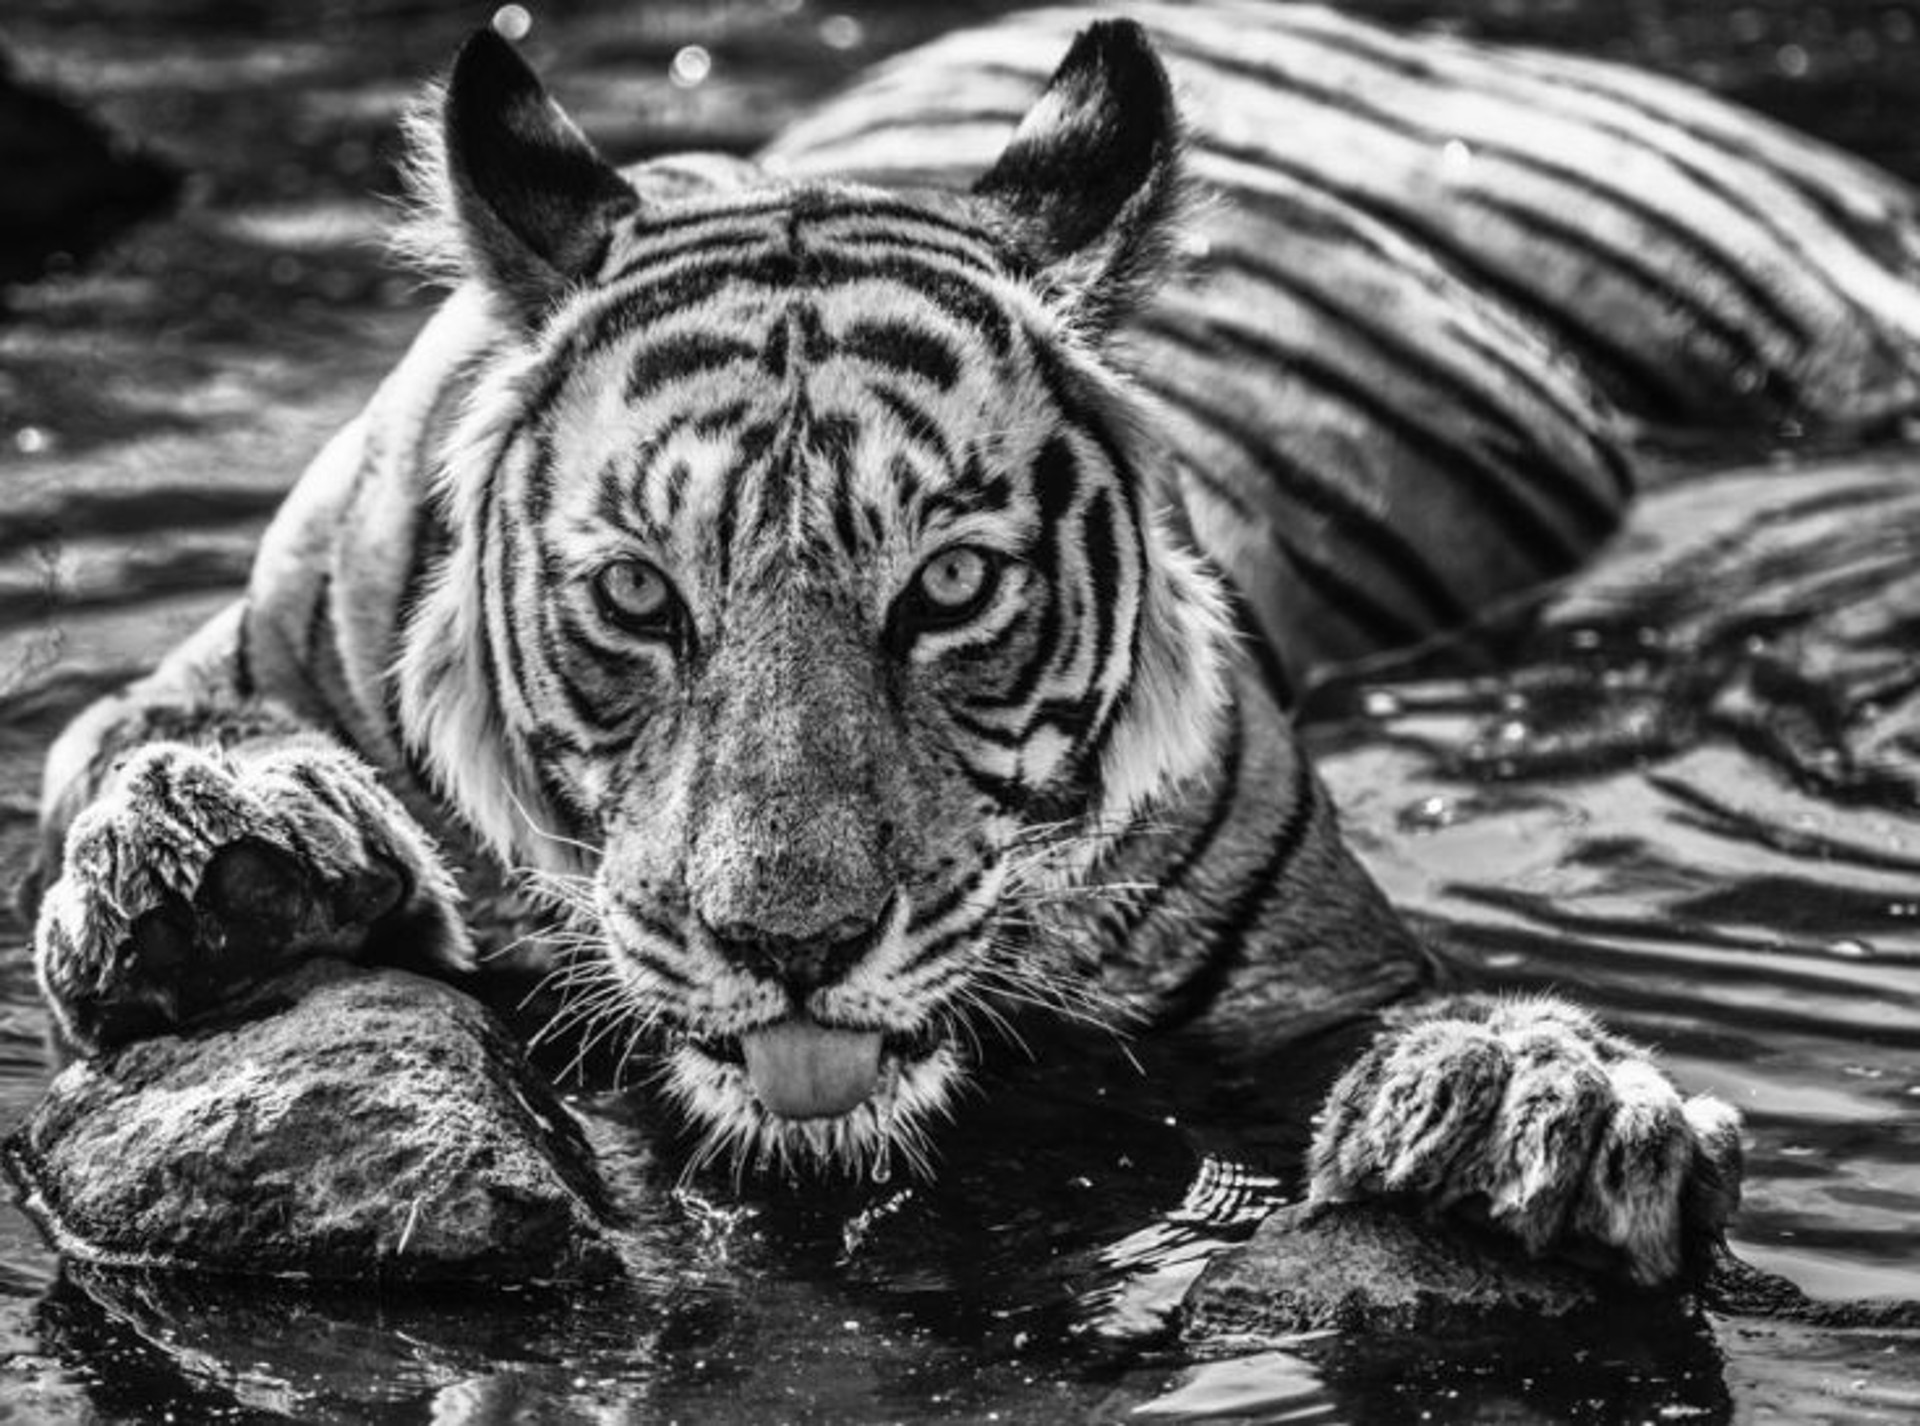 The Queen of Ranthambore by David Yarrow